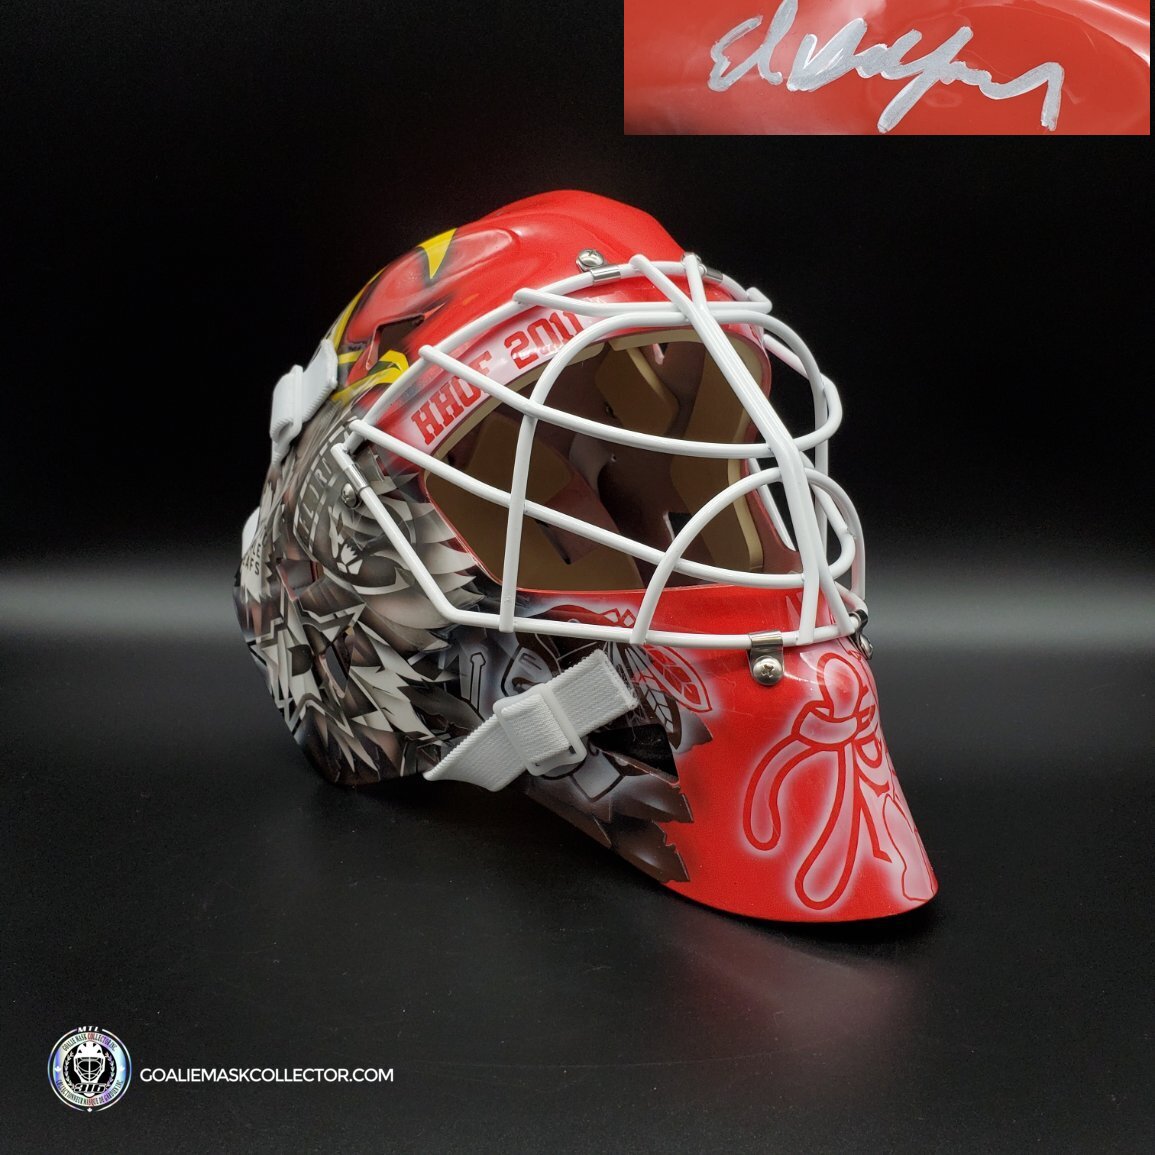 ED BELFOUR ULTIMATE GOALIE MASKS COLLECTION // Game Worn Game Ready Replica  Tributes Autographed 